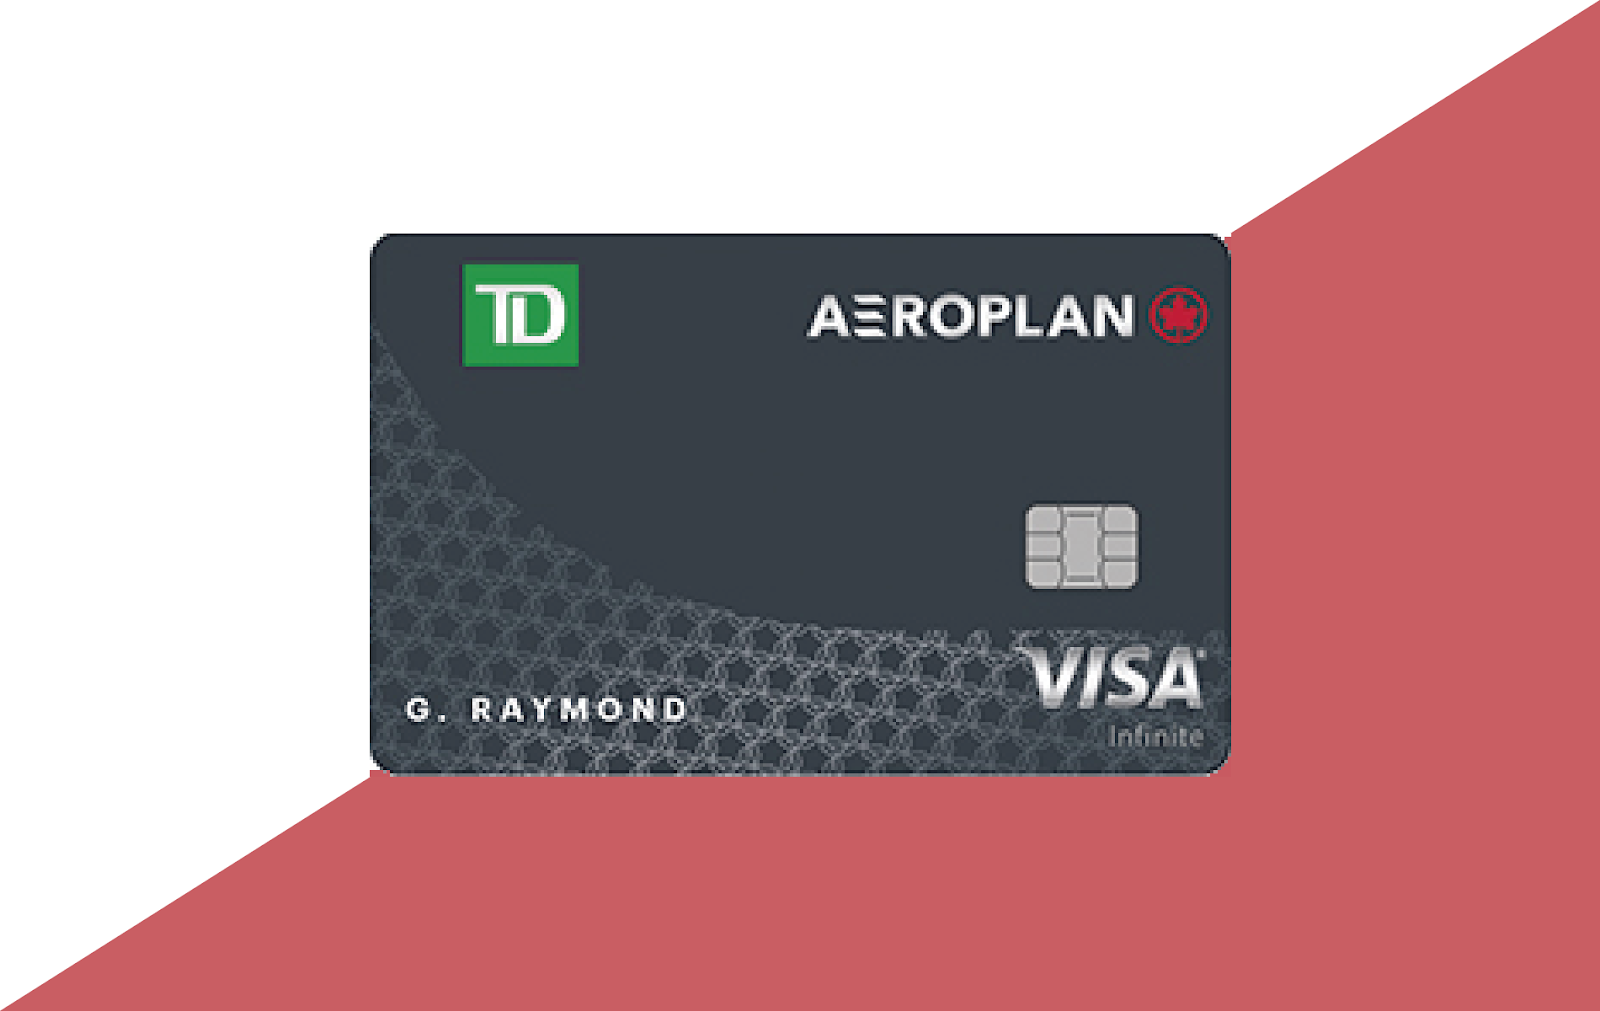 Best TD Credit Cards Canada TD Aeroplan Visa Infinite Card - Best for travel reward points and other travel benefits